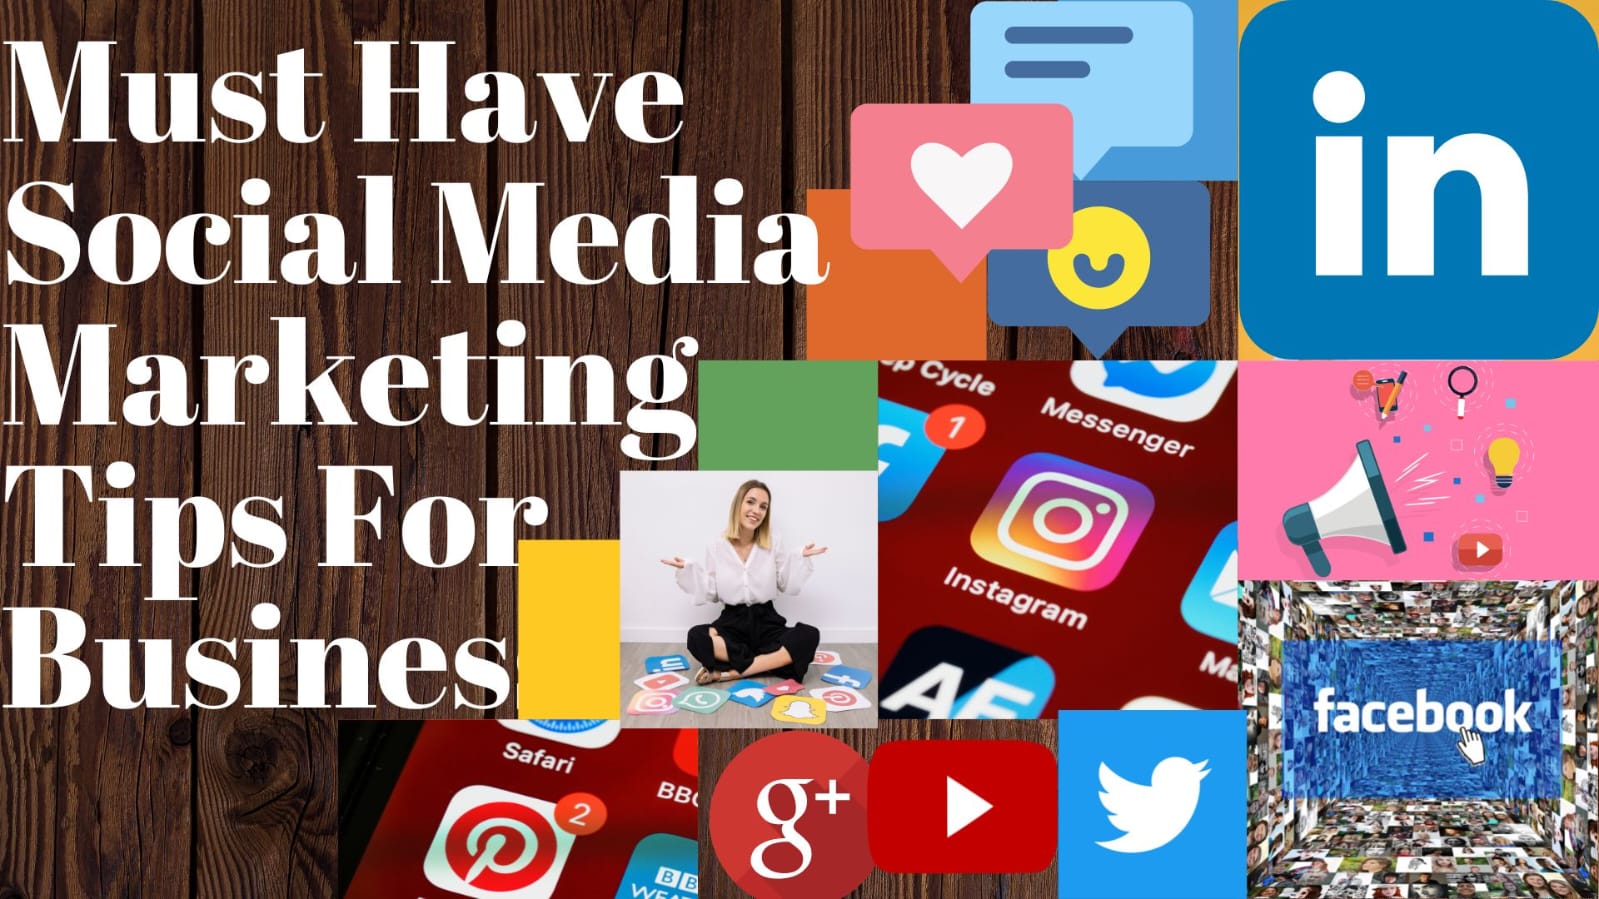 Must Have Social Media Marketing Tips For Business